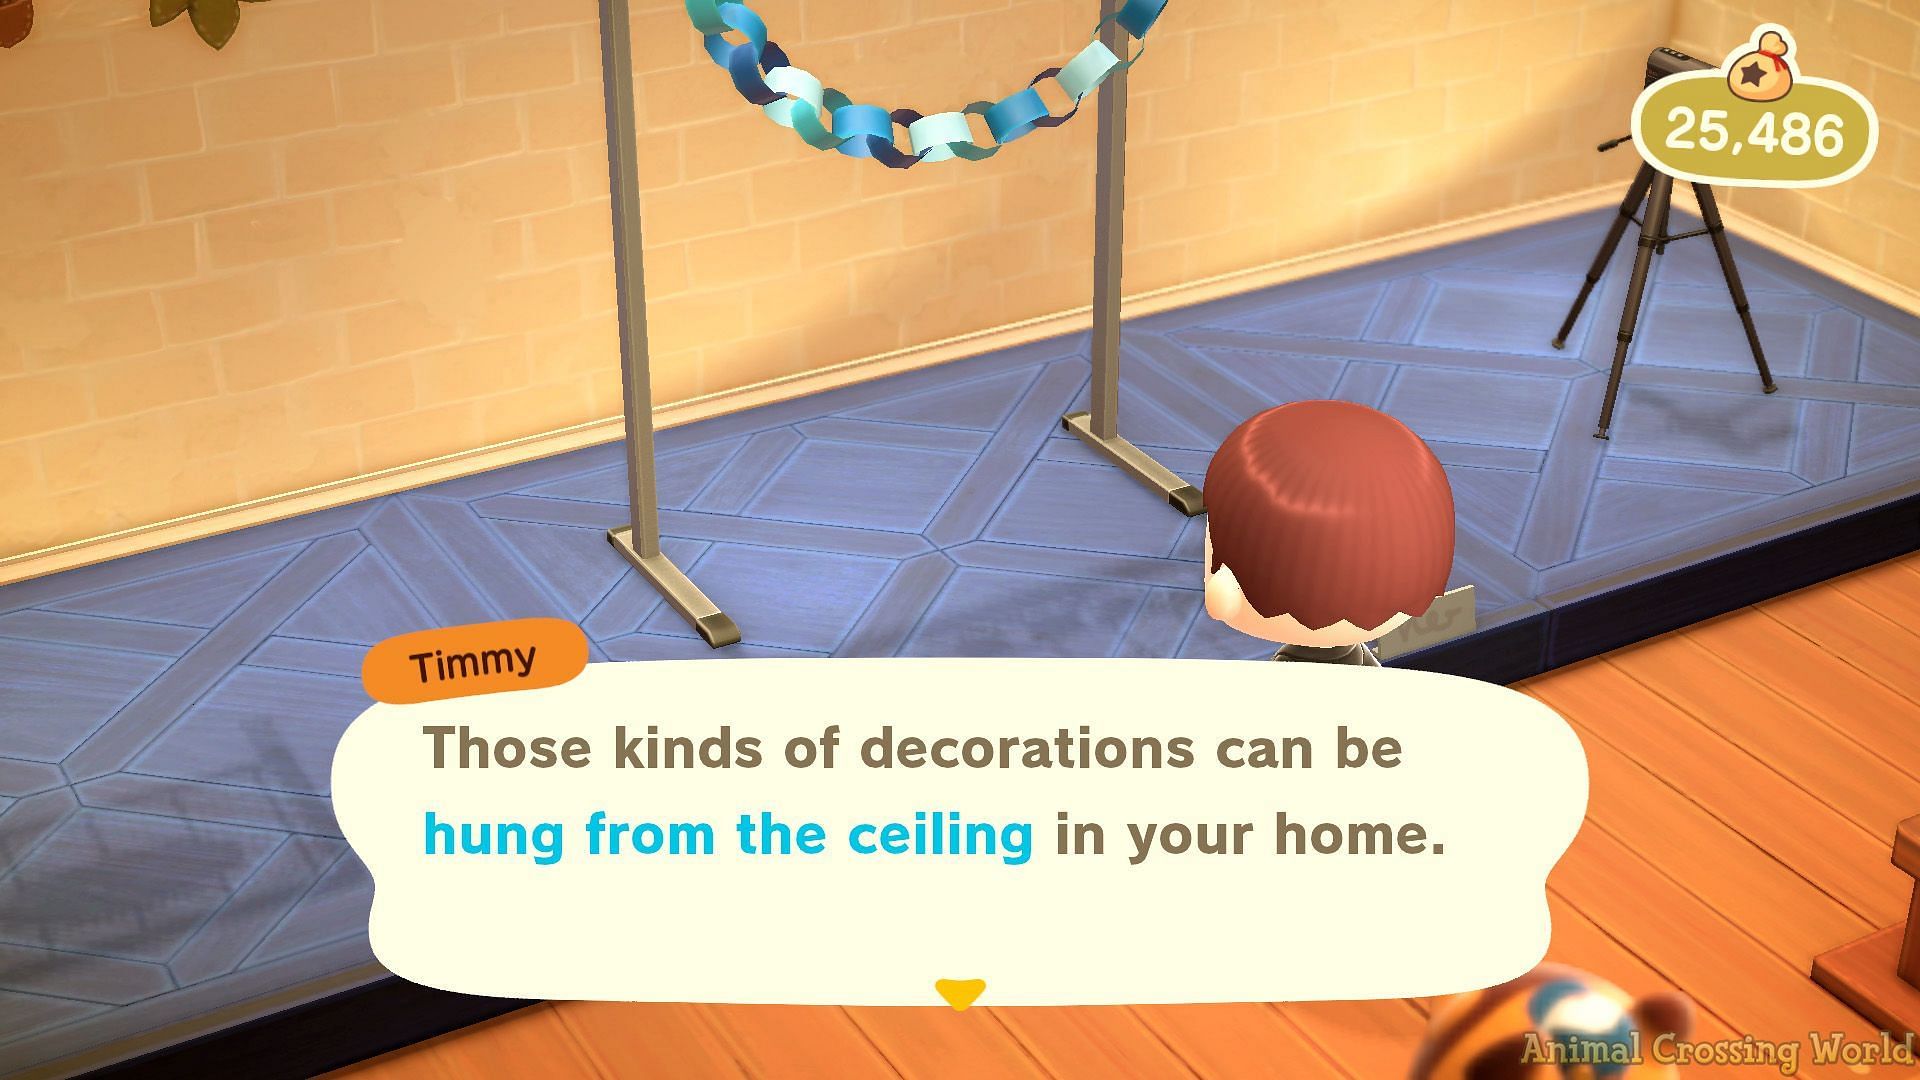 The Pro Decorating License is a recent feature that has been added to Animal Crossing: New Horizons (Image via Animal Crossing World)